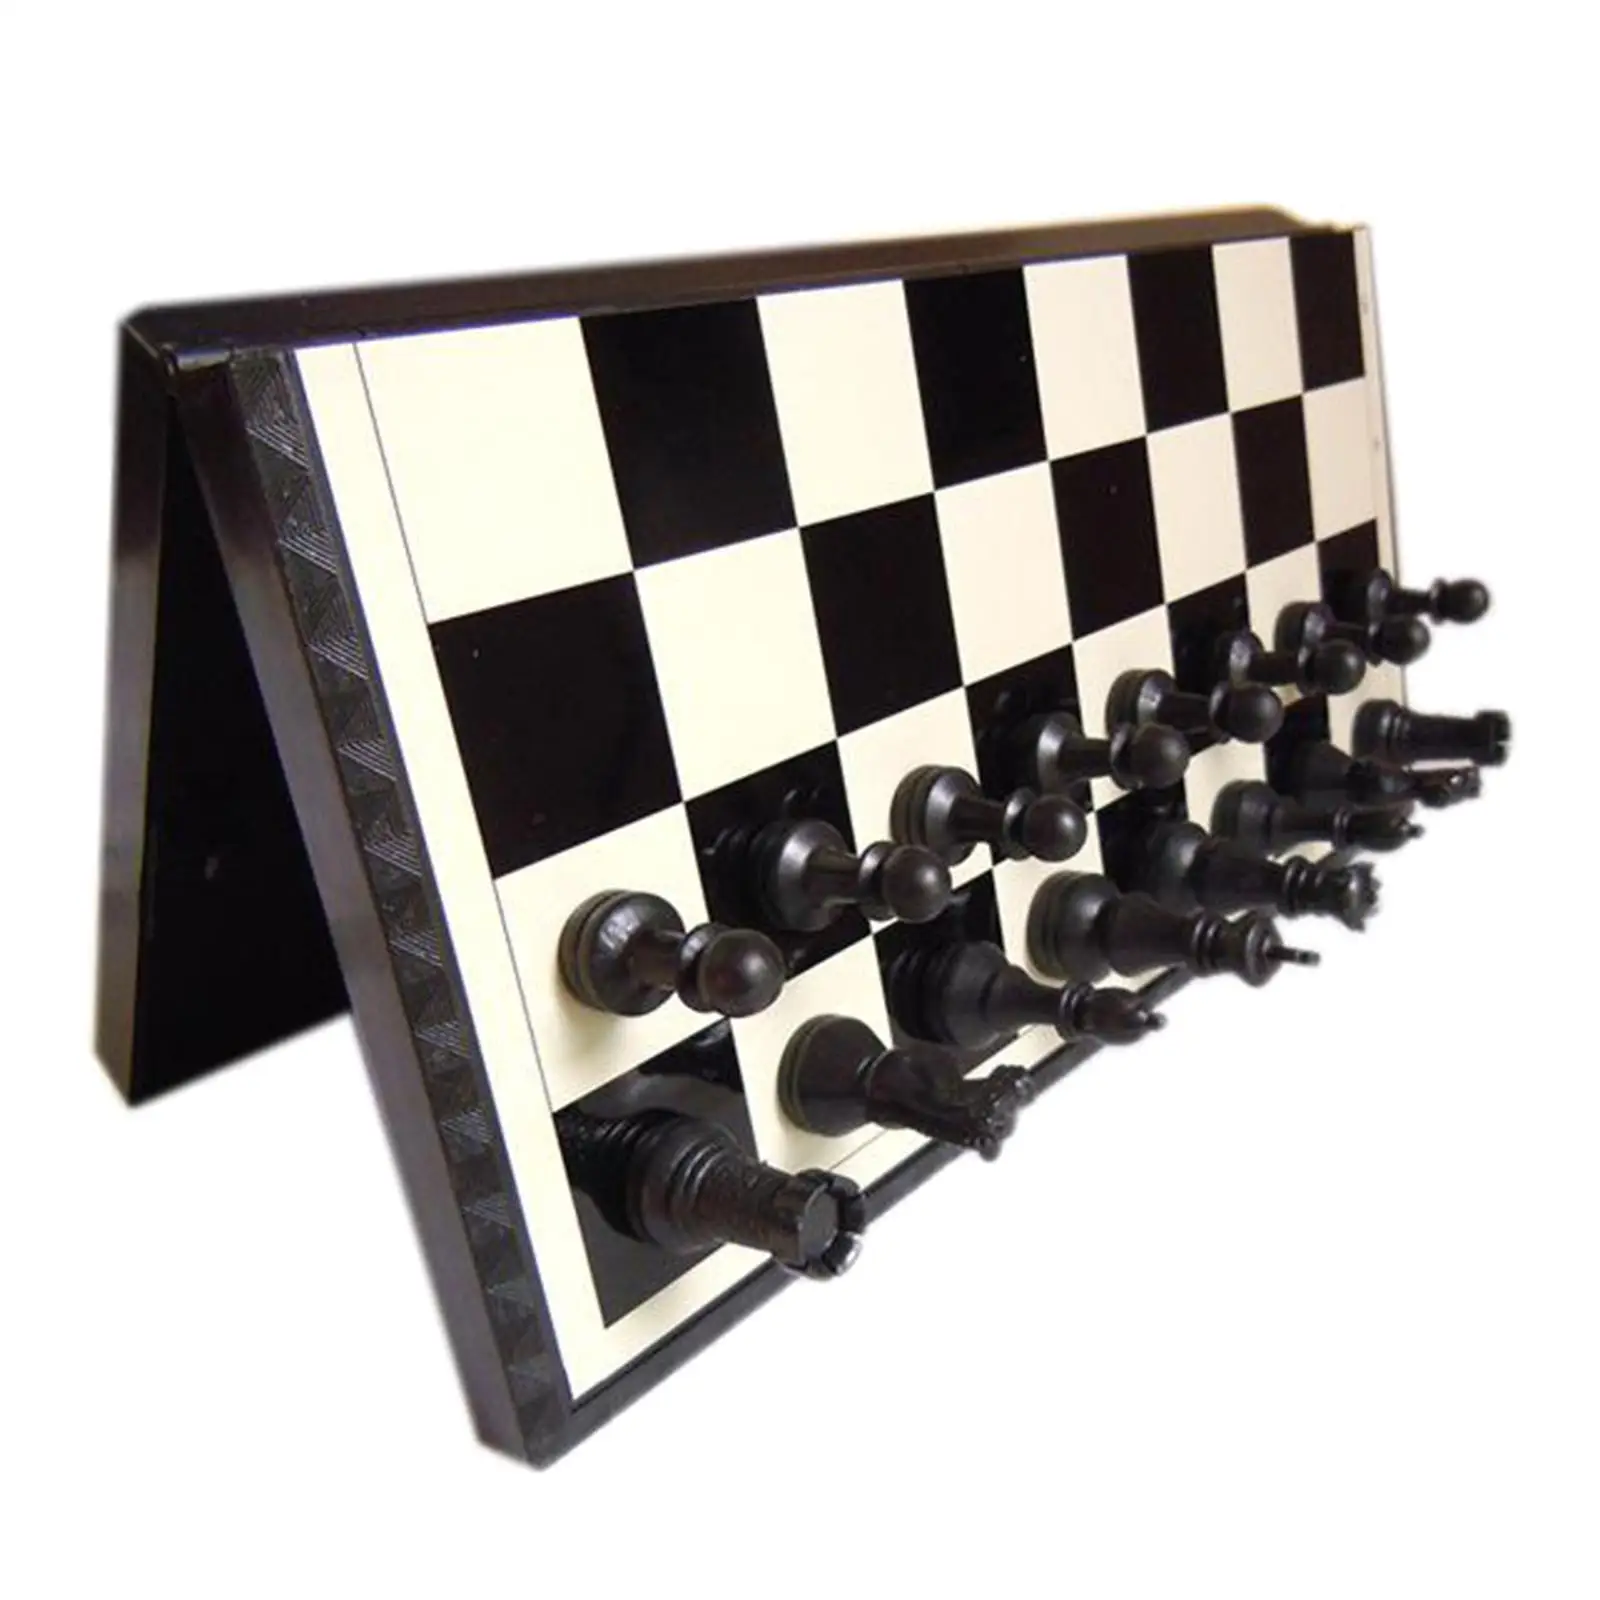 11-Inch International Chess Set Folding Chessboard Magnetic Chess Pieces Chess Game 2 Players Family Entertainment Board Game